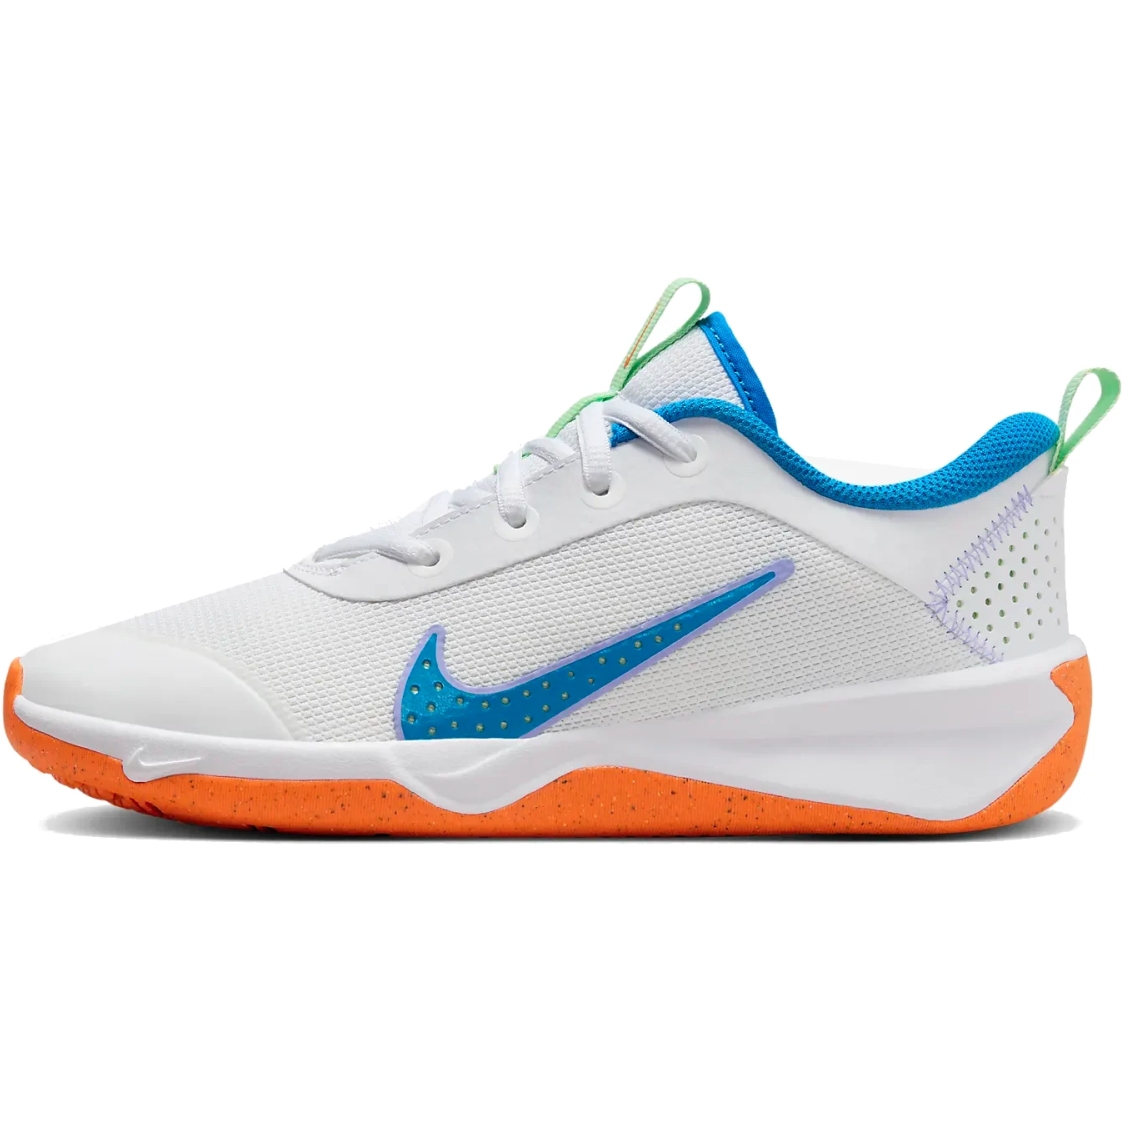 Picture of Nike Omni Multi Court Indoor Shoes Kids - white/photo blue-vapor green DM9027-107